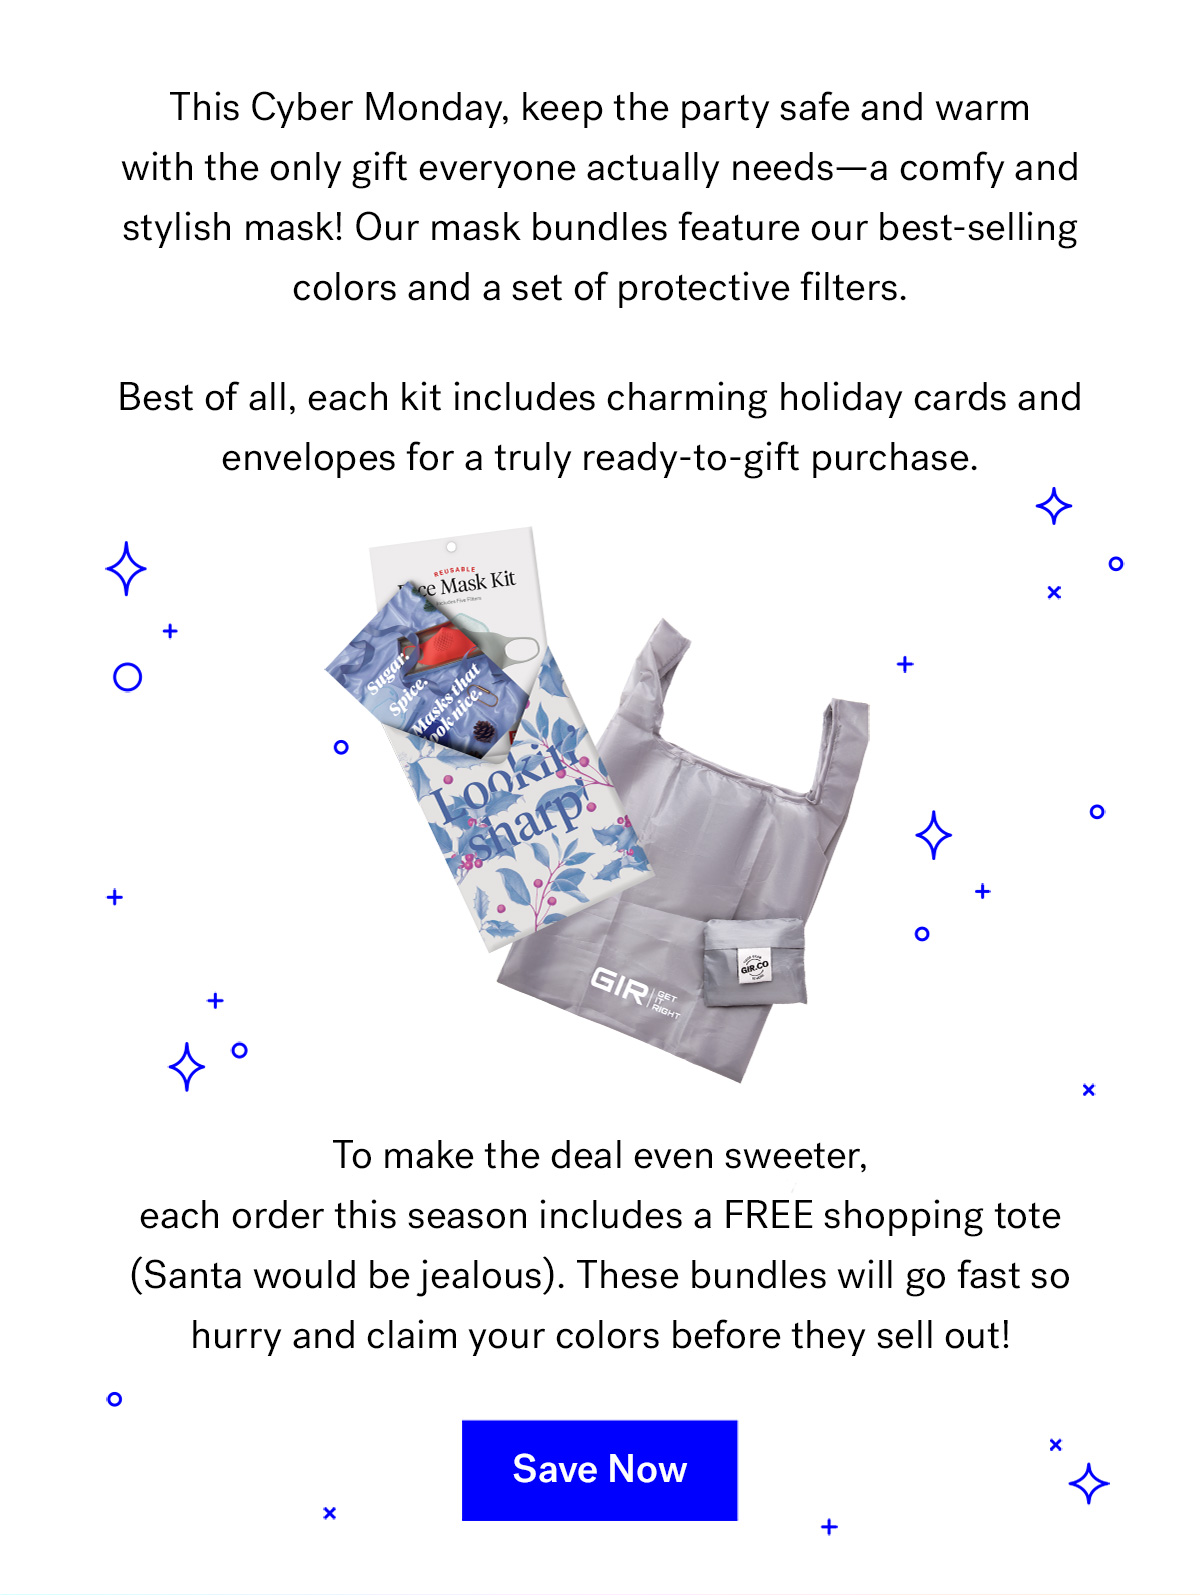       
                                
                                This Cyber Monday, keep the party safe and warm with the only gift everyone actually needs--a comfy and stylish mask! Our mask bundles feature our best-selling colors and a set of protective filters. 
                                Best of all, each kit includes charming holiday cards and envelopes for a truly ready-to-gift purchase.


                                To make the deal even sweeter, each order this season includes GIR Reusable Shopping Tote (Santa would be jealous). 
                                These bundles will go fast so hurry and claim your colors before they sell out!



                                Save Now

                                